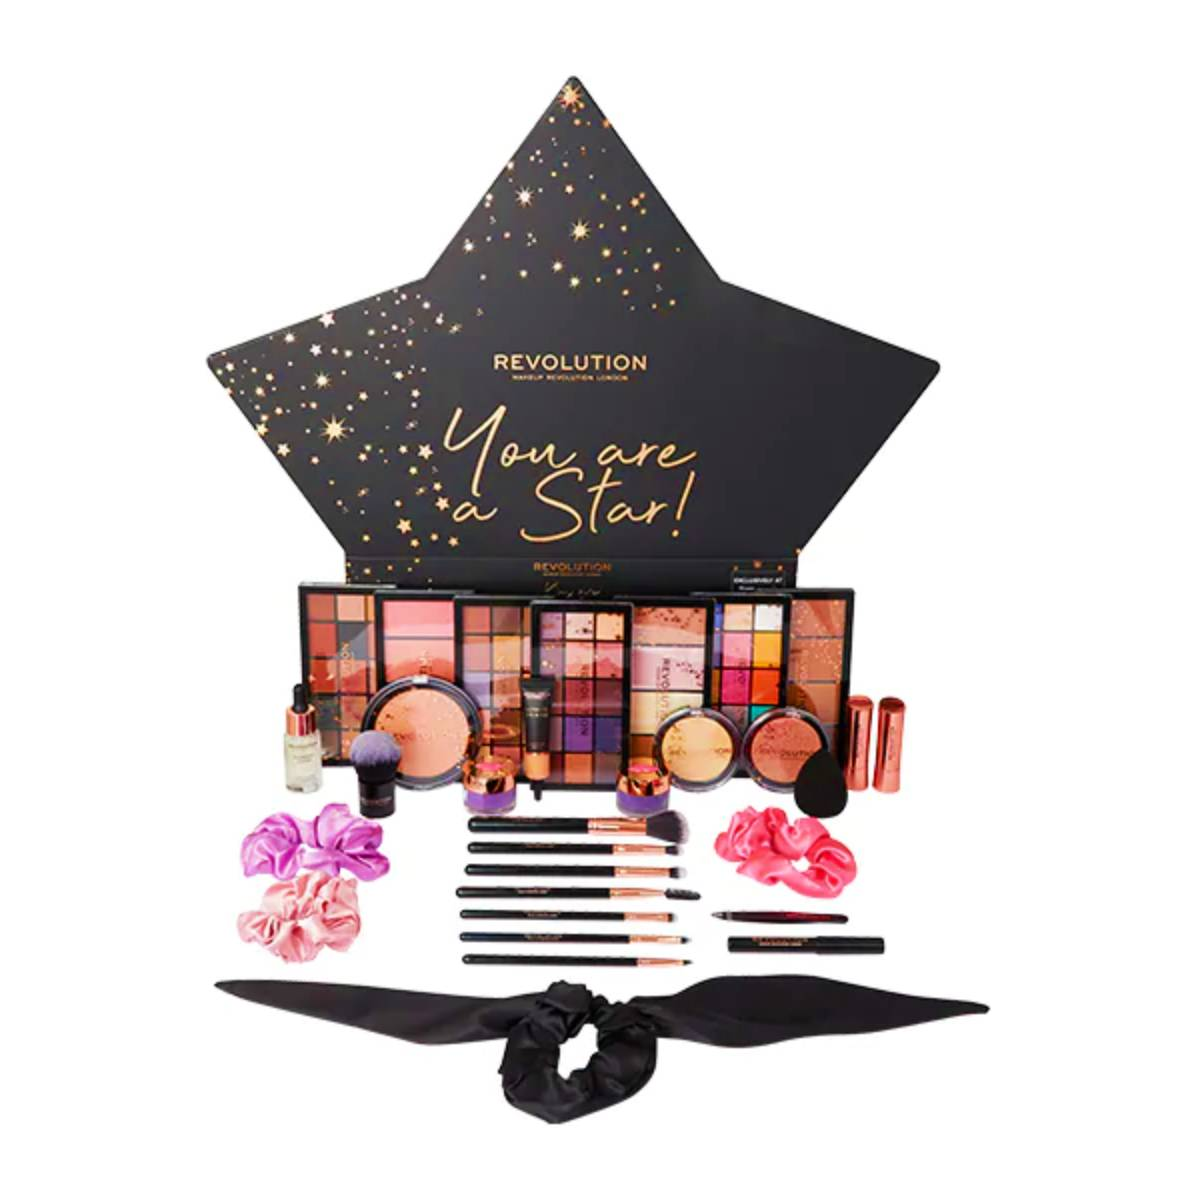 kost Fighter opstrøms Makeup Revolution Advent Calendars 2020 Coming Soon + Full Spoilers! -  Hello Subscription